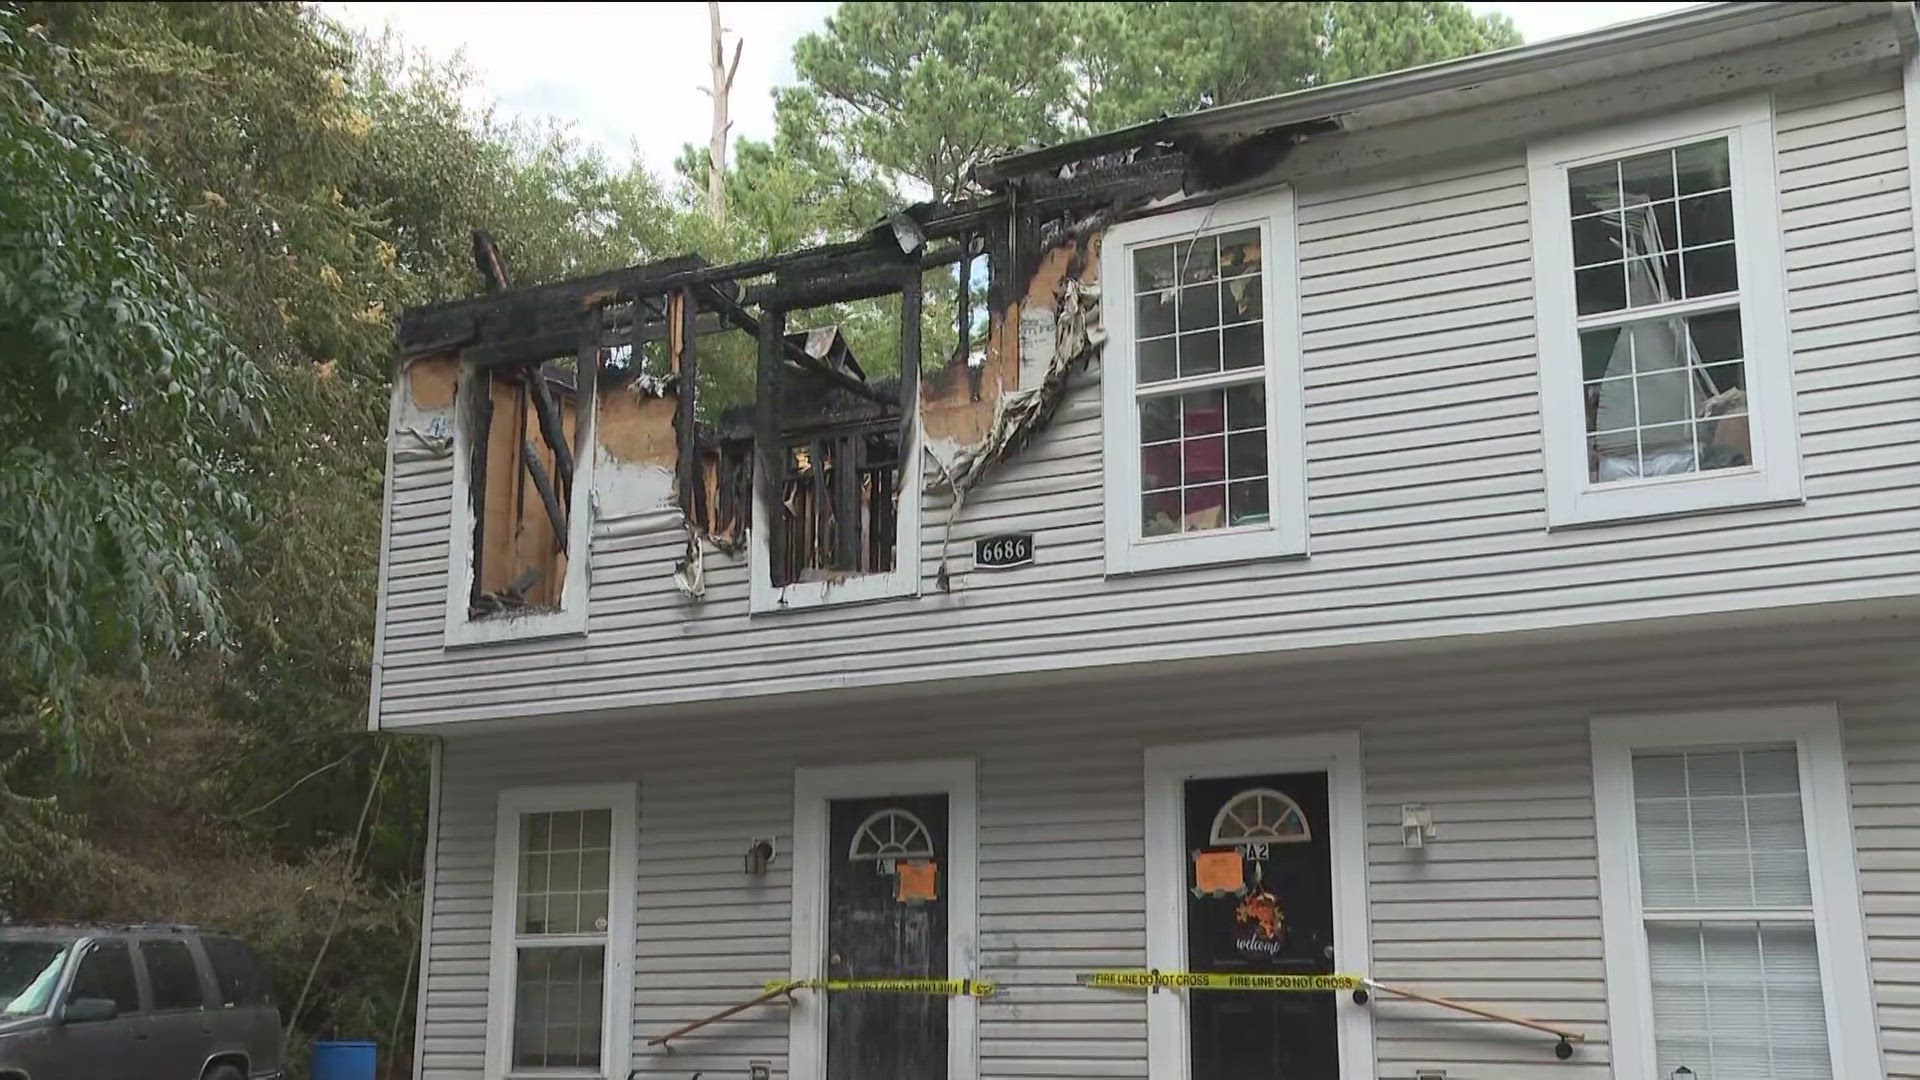 DeKalb Fire said the flames sparked at a townhome at the 6600 block of Chupp Road in Stonecrest.